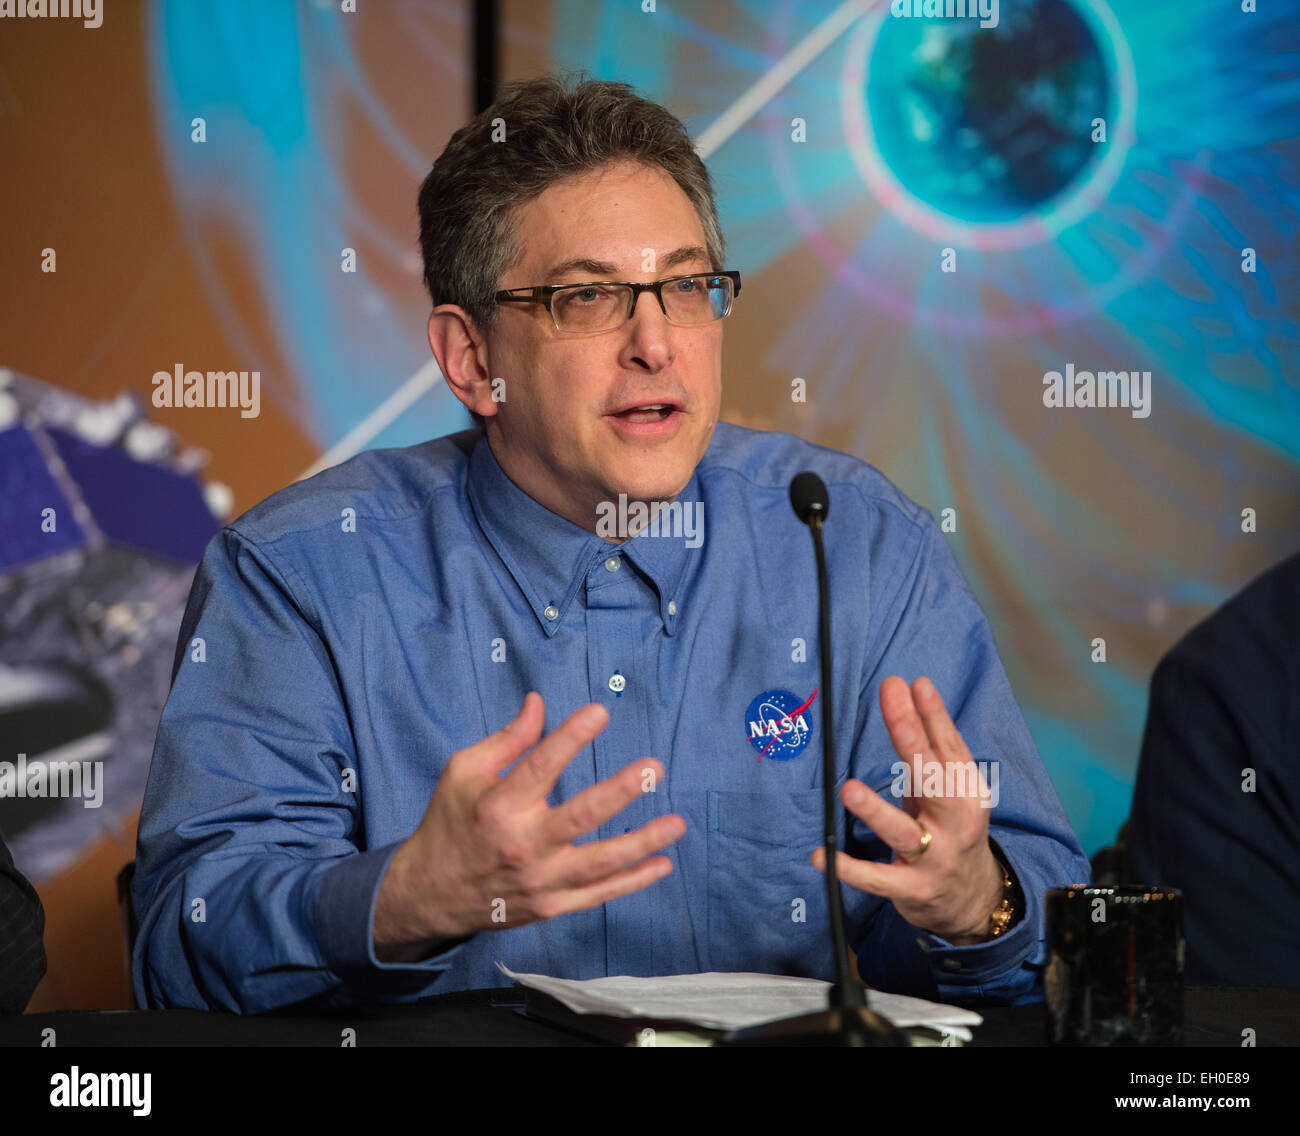 Jeff Newmark, interim director, Heliophysics Division, NASA Headquarters speaks during a briefing about the upcoming launch of the Magnetospheric Multiscale (MMS) mission, Wednesday, February 25, 2015, at NASA Headquarters in Washington DC. The mission is scheduled for a March 12 launch from Cape Canaveral Air Force Station in Florida, and will help scientists understand the process of magnetic reconnection in the atmosphere of the sun and other stars, in the vicinity of black holes and neutron stars, and at the boundary between our solar system’s heliosphere and interstellar space. The missio Stock Photo